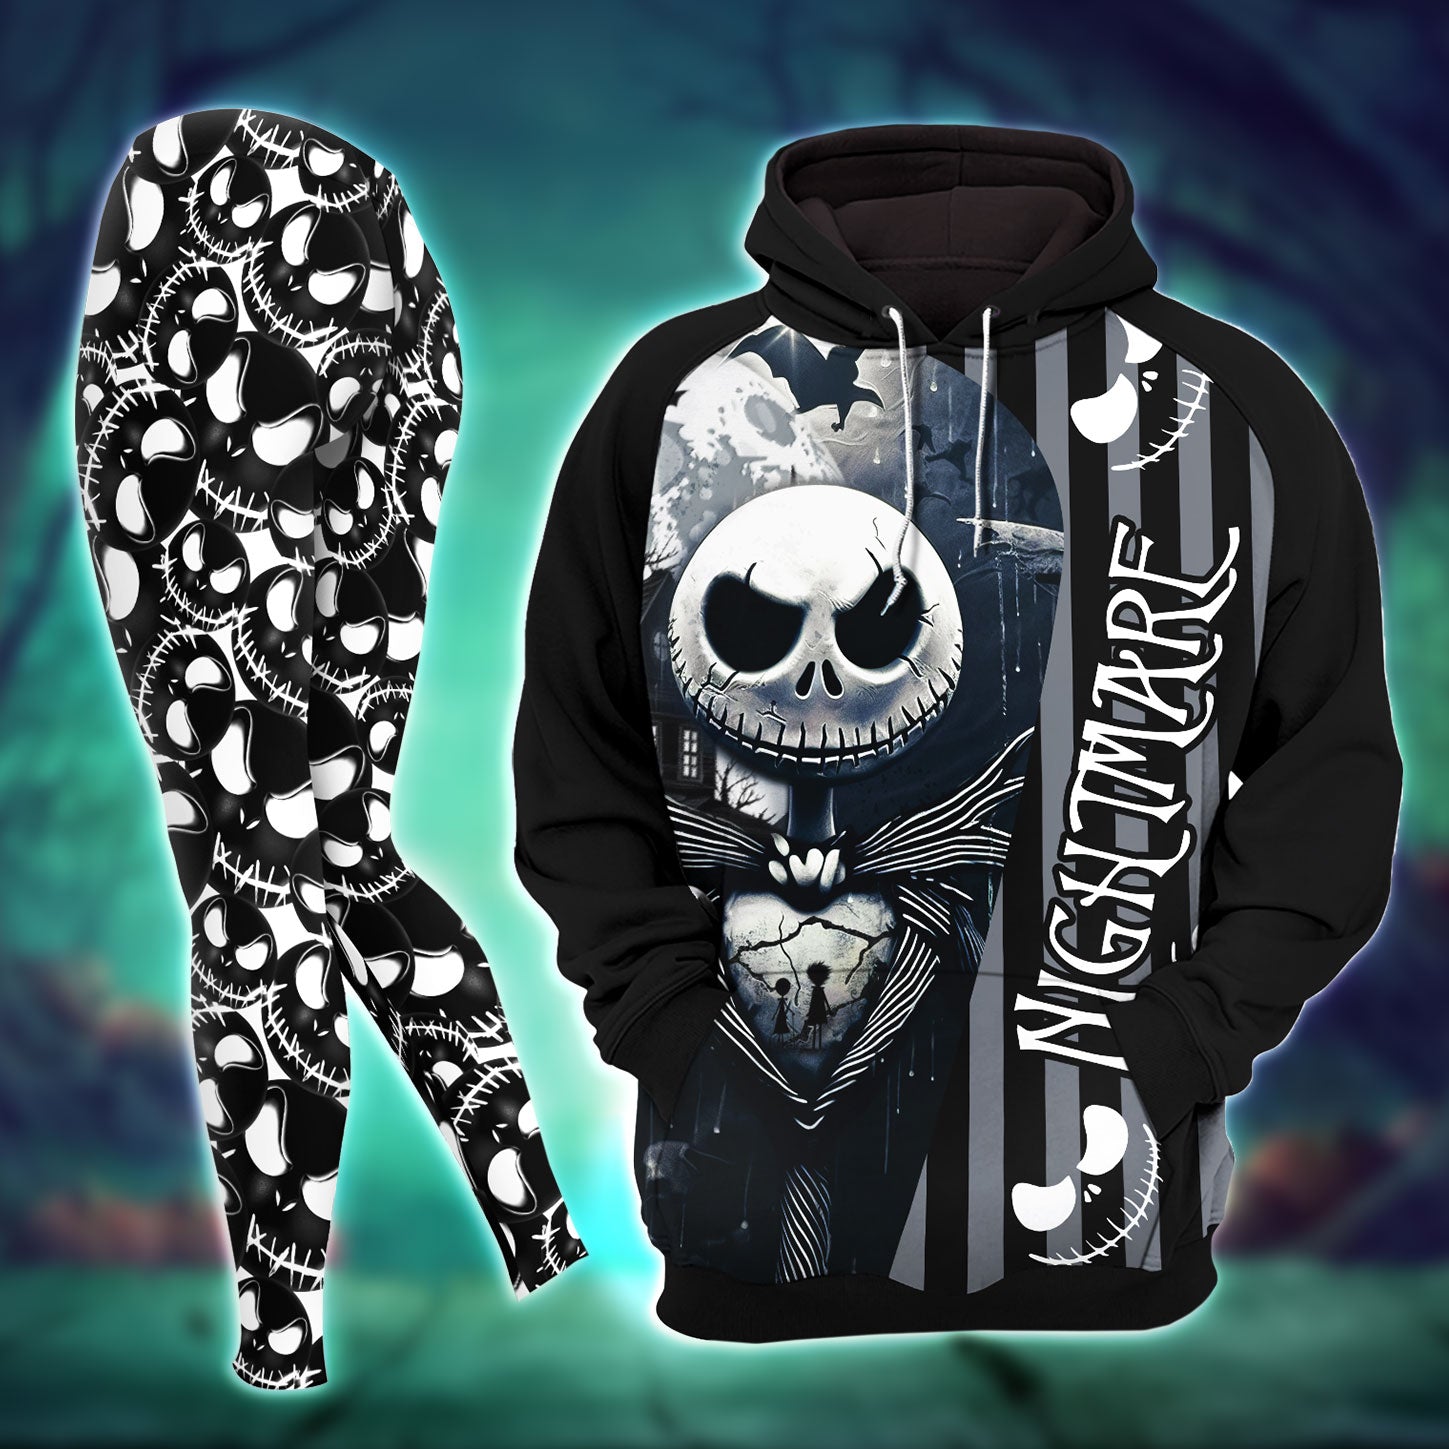 Cool Little Nightmare Combo Hoodie and Leggings - Dark and edgy matching set with skull designs for a unique and stylish look.